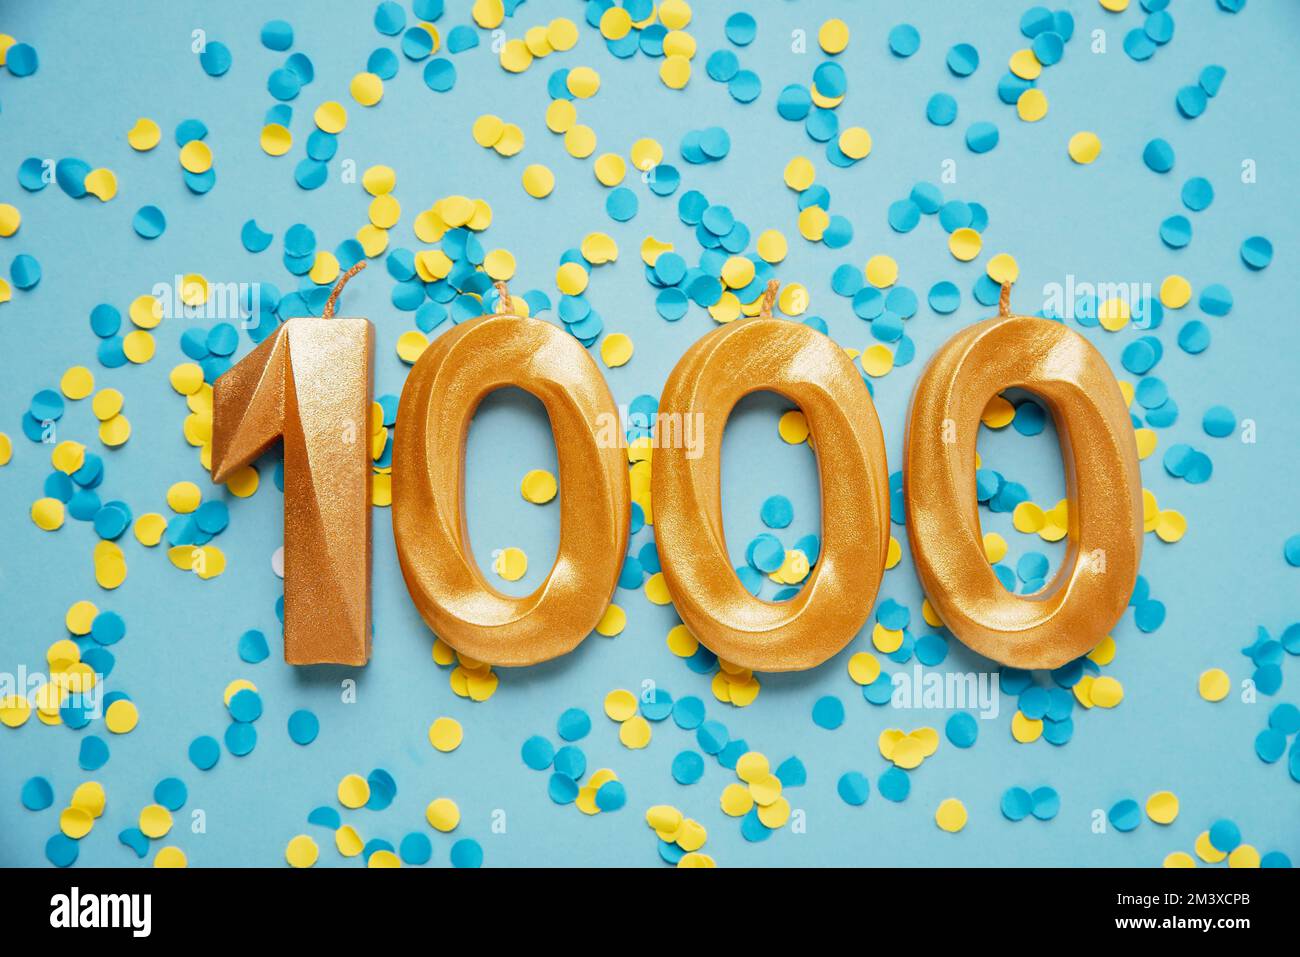 1000 one thousand followers subscriber card golden birthday candle on yellow and blue confetti Background. Template for social networks, blogs. celebration banner. 1000 online community fans. Stock Photo